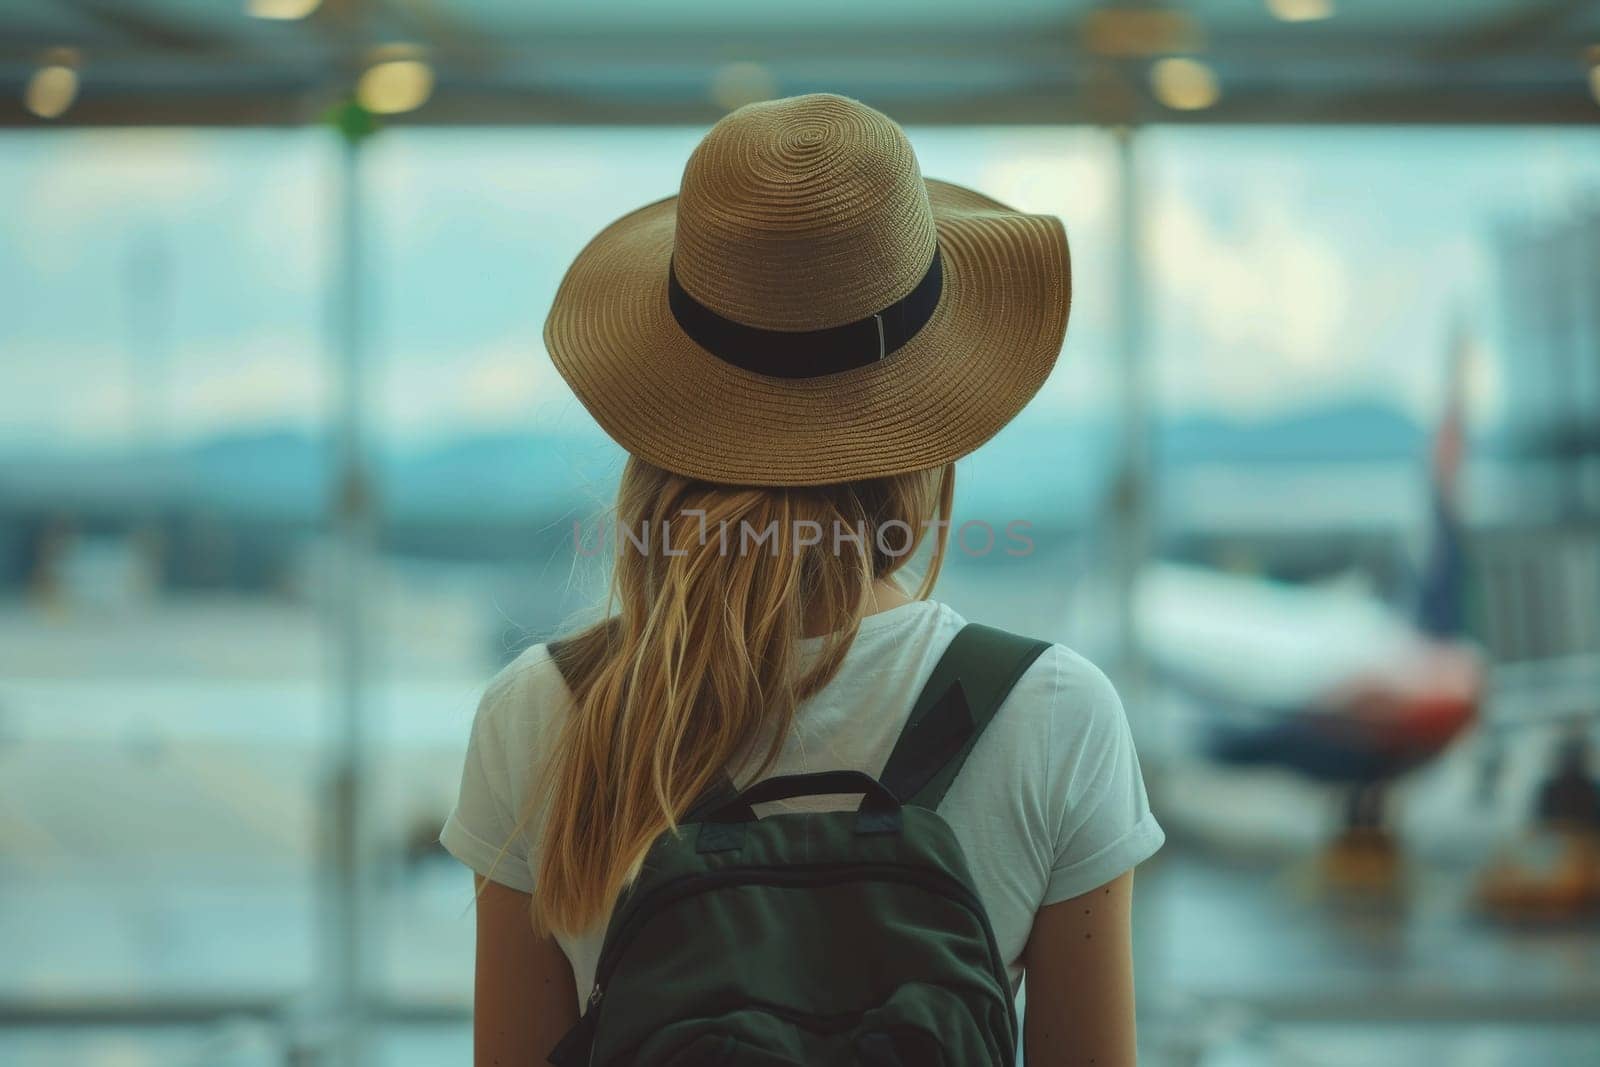 Woman have a trip in vacation day with backpacker at airport.